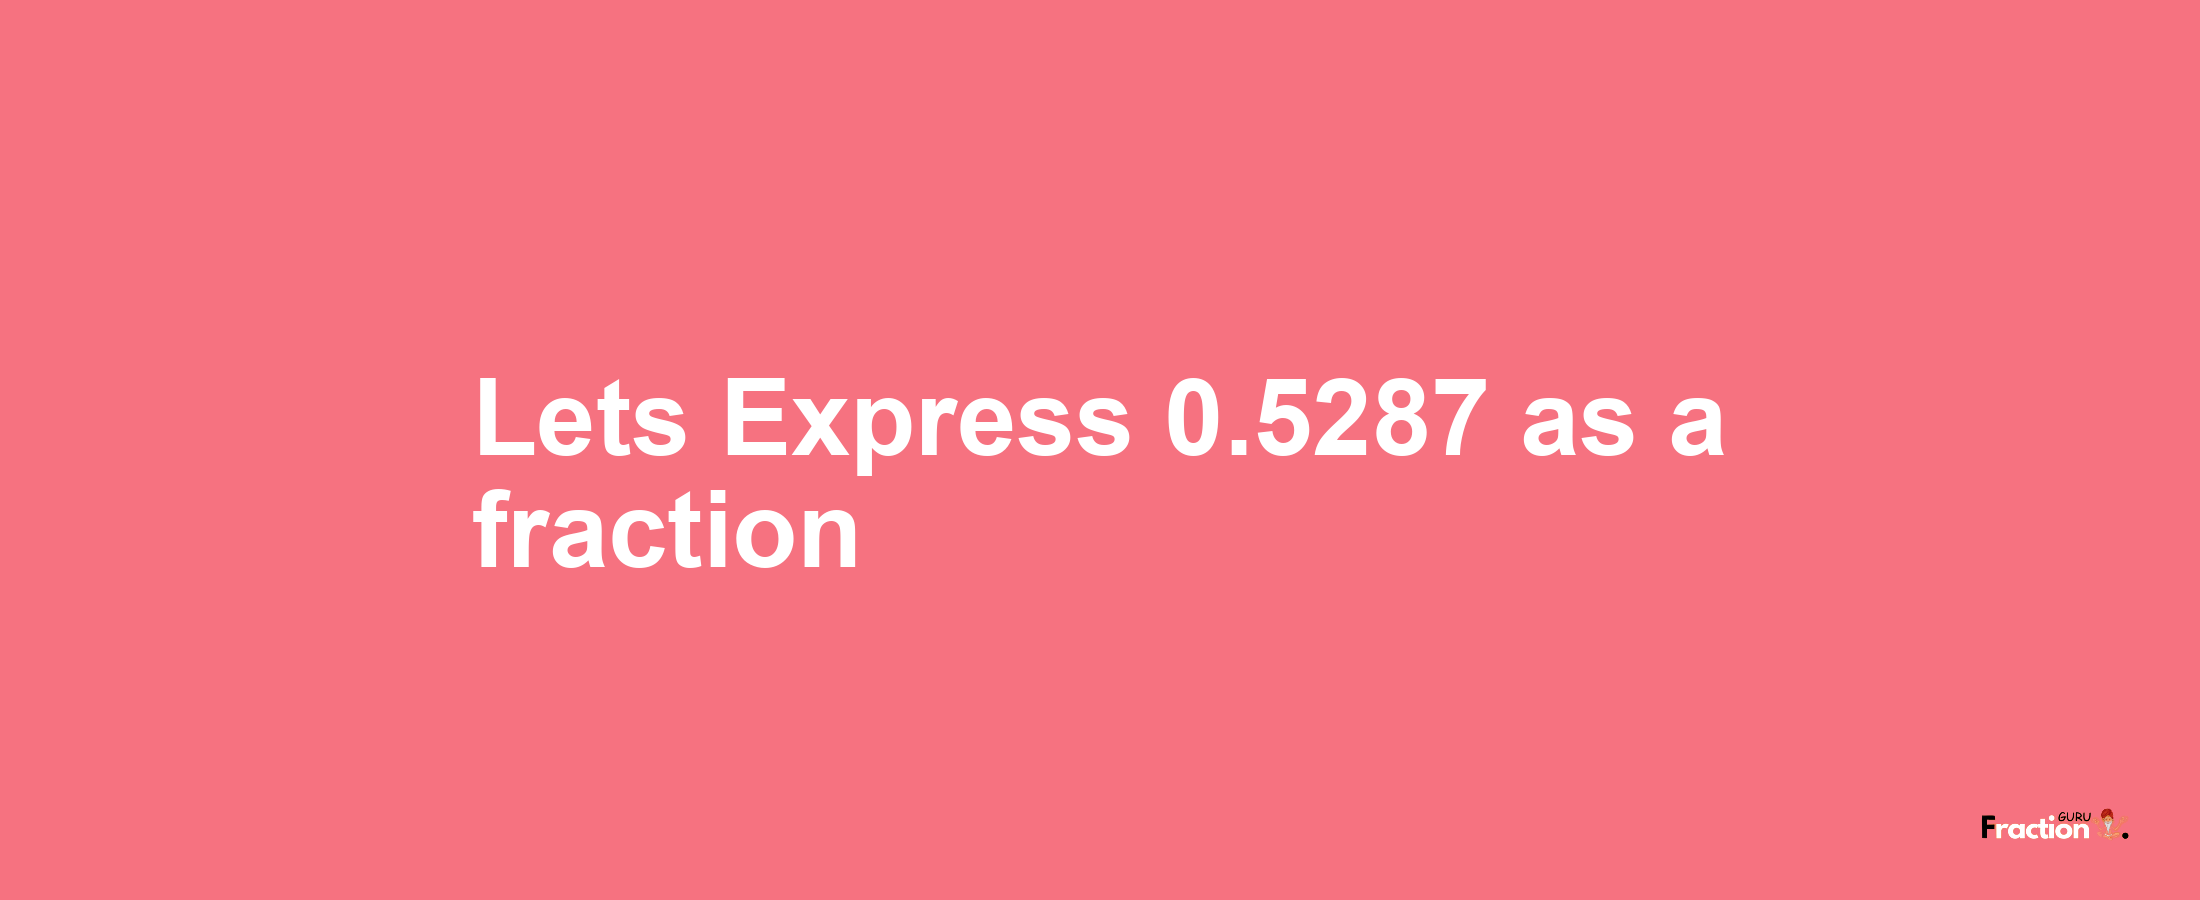 Lets Express 0.5287 as afraction